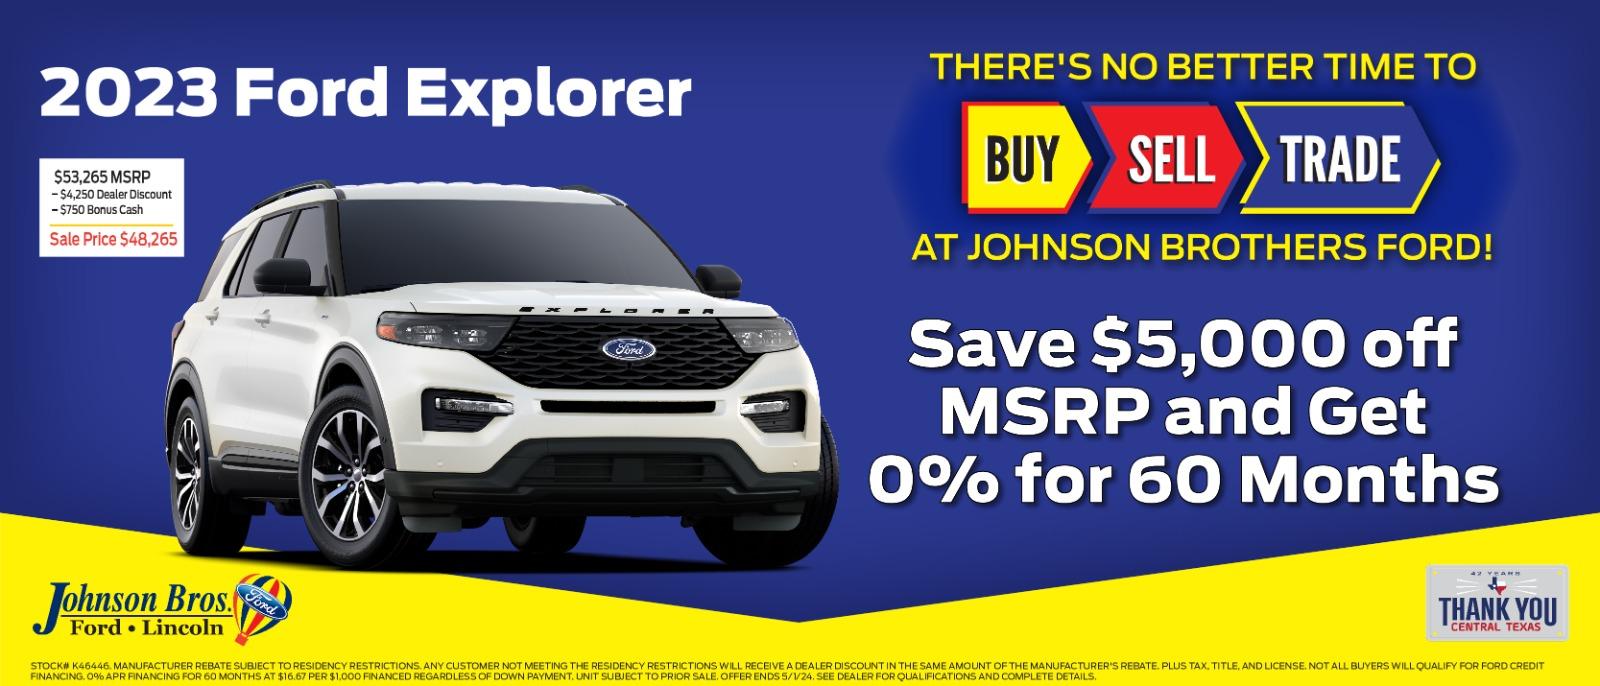 2023 Ford Explorer 

Save $5,000 off msrp and get 0% for 60 months